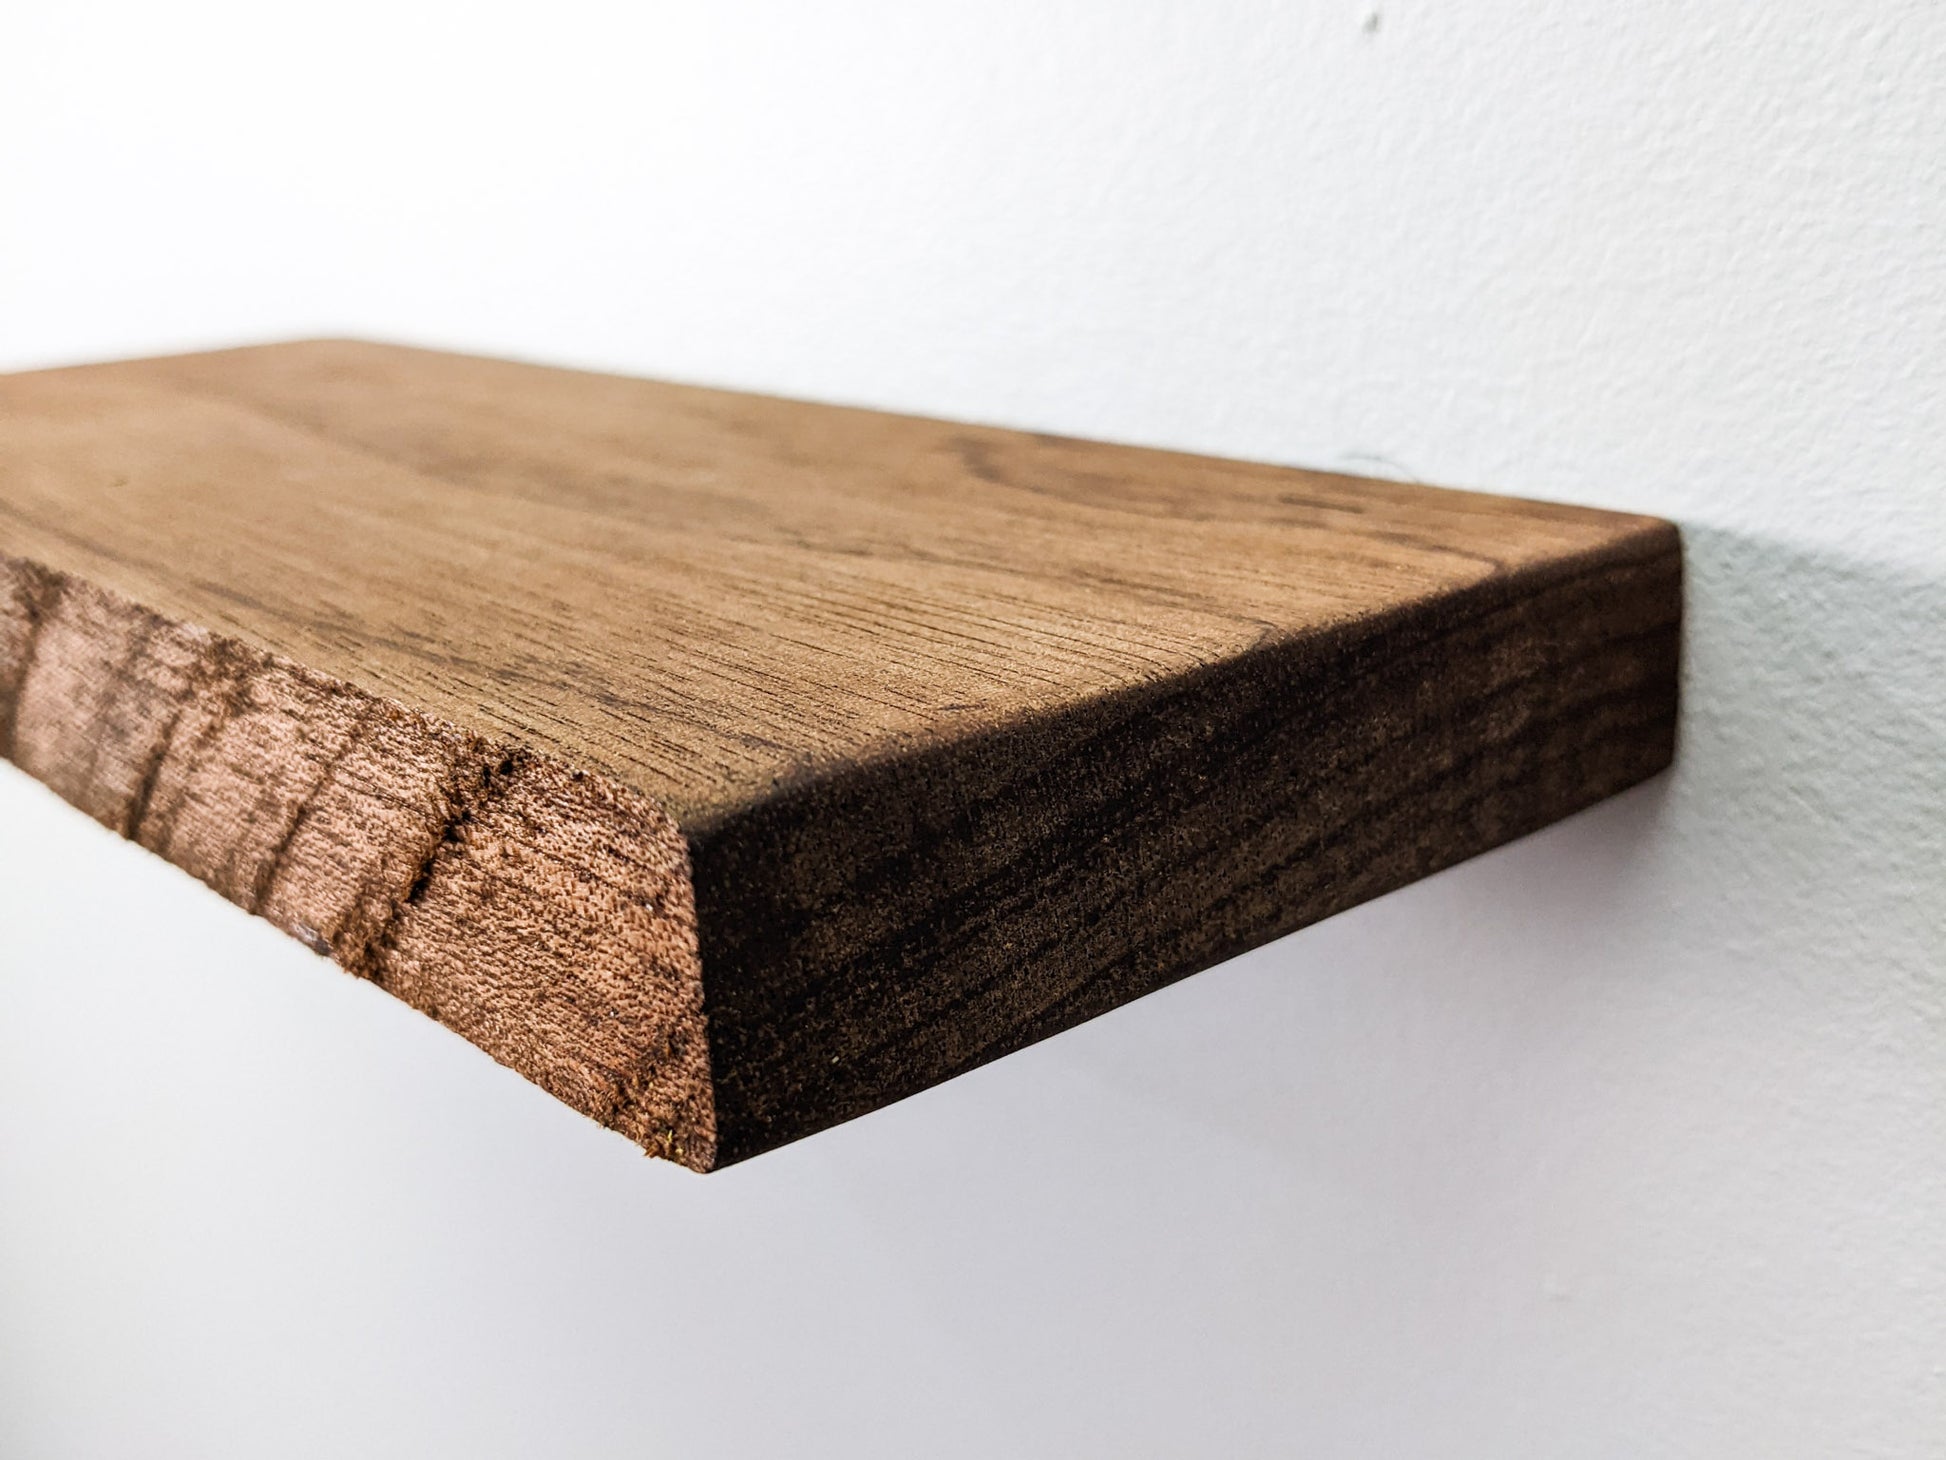 A side view of our mahogany medium wall-mounted live edge shelf. The live edge is textured and has not been sanded smooth to reveal the natural beauty of the mahogany wood. The top is bare.